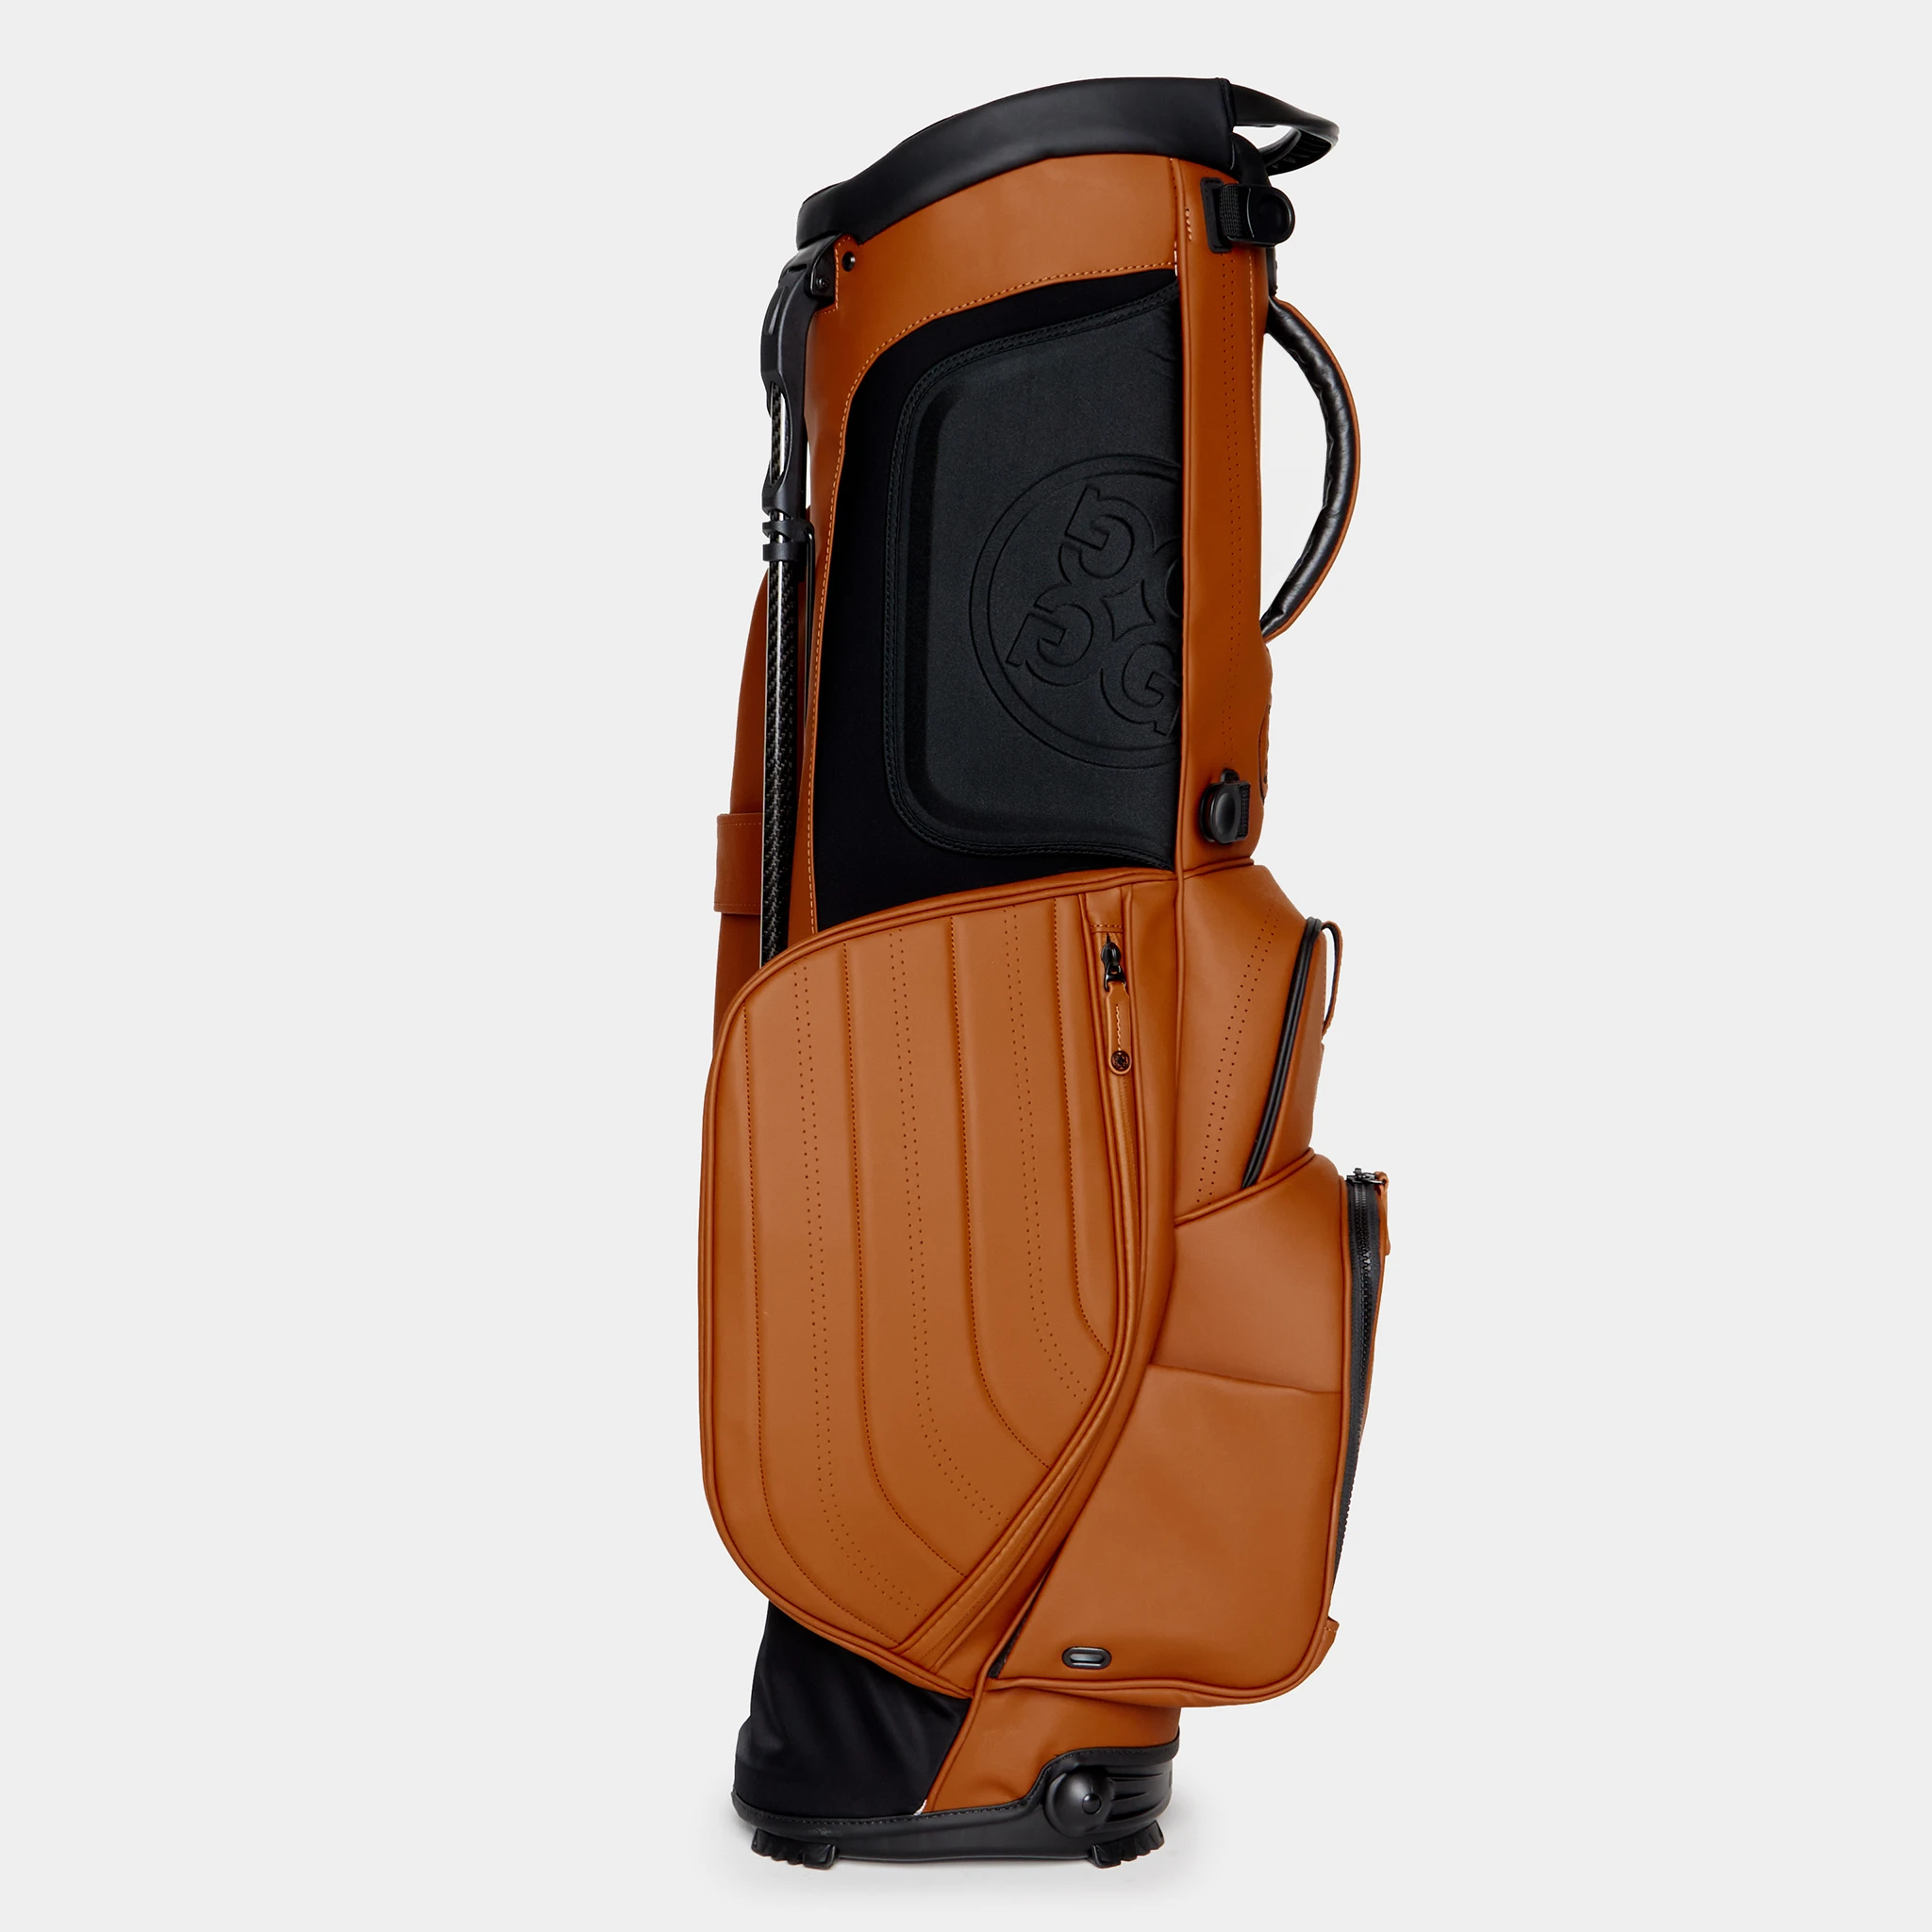 UNISEX TRANSPORTER TOUR CARRY GOLF BAG / G/FORE（ジーフォア）の 